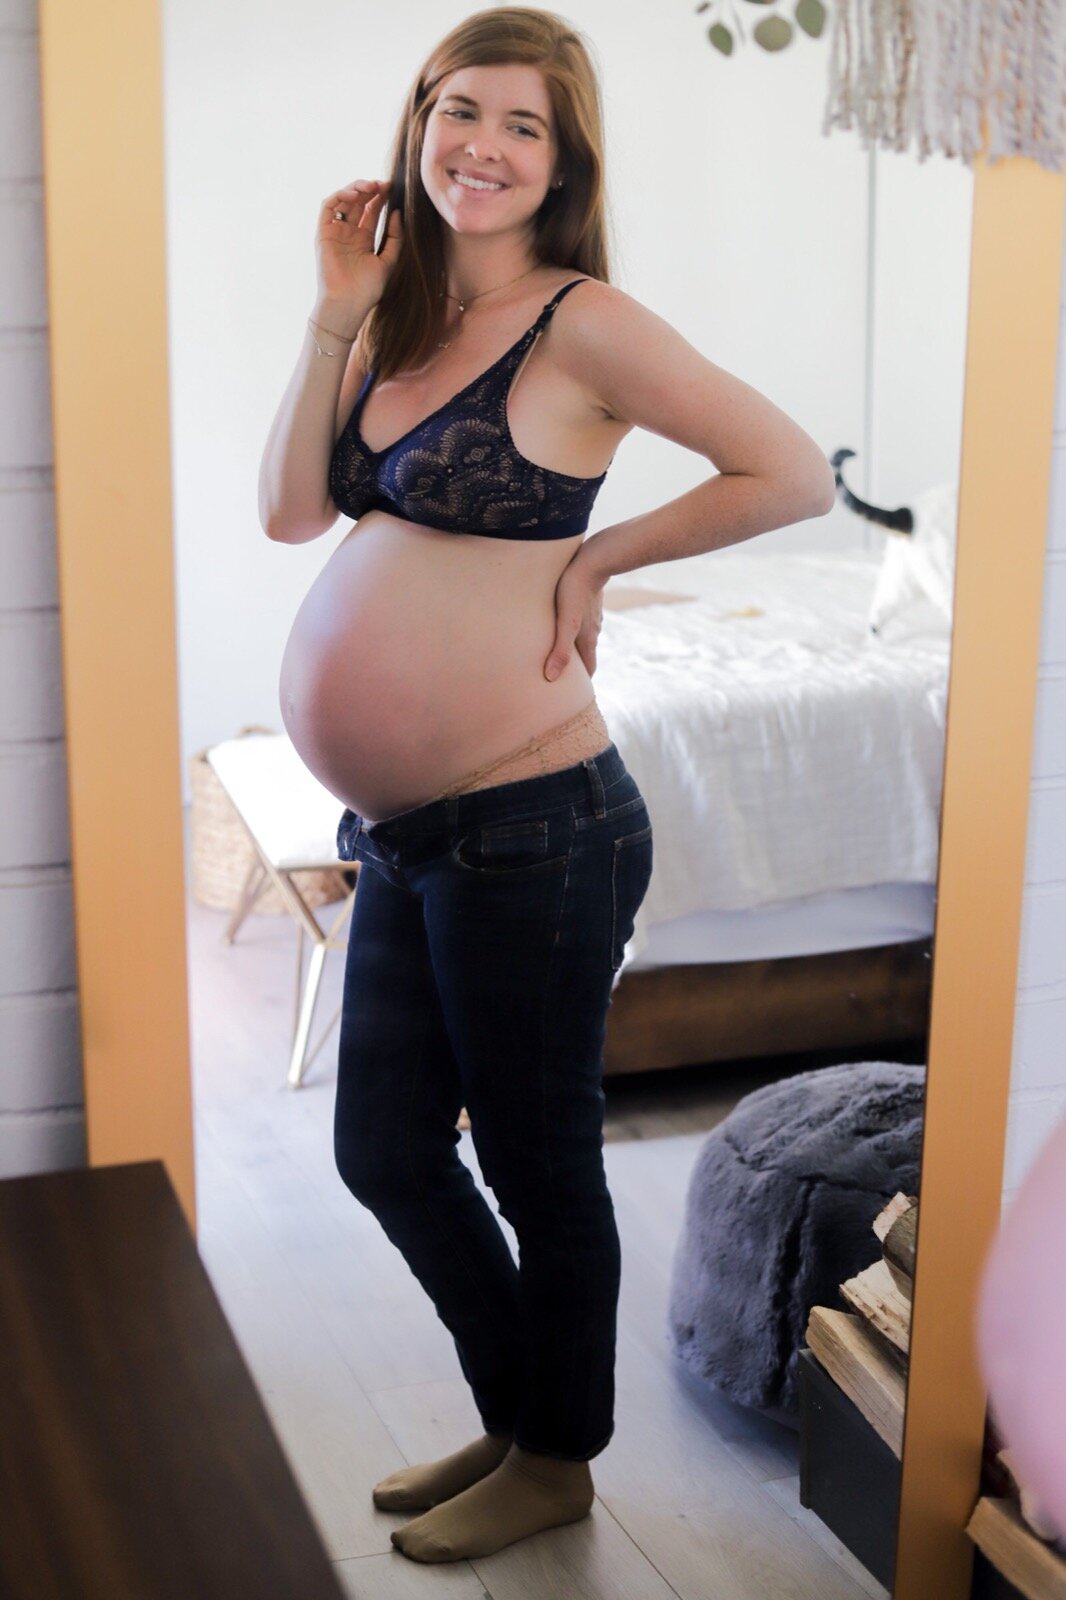 second trimester with twins, di-di twins, boy girl twins, lments of style, twin pregnancy, twin mom, dairy fairy nursing bra with clasp, la blogger, mom blogger